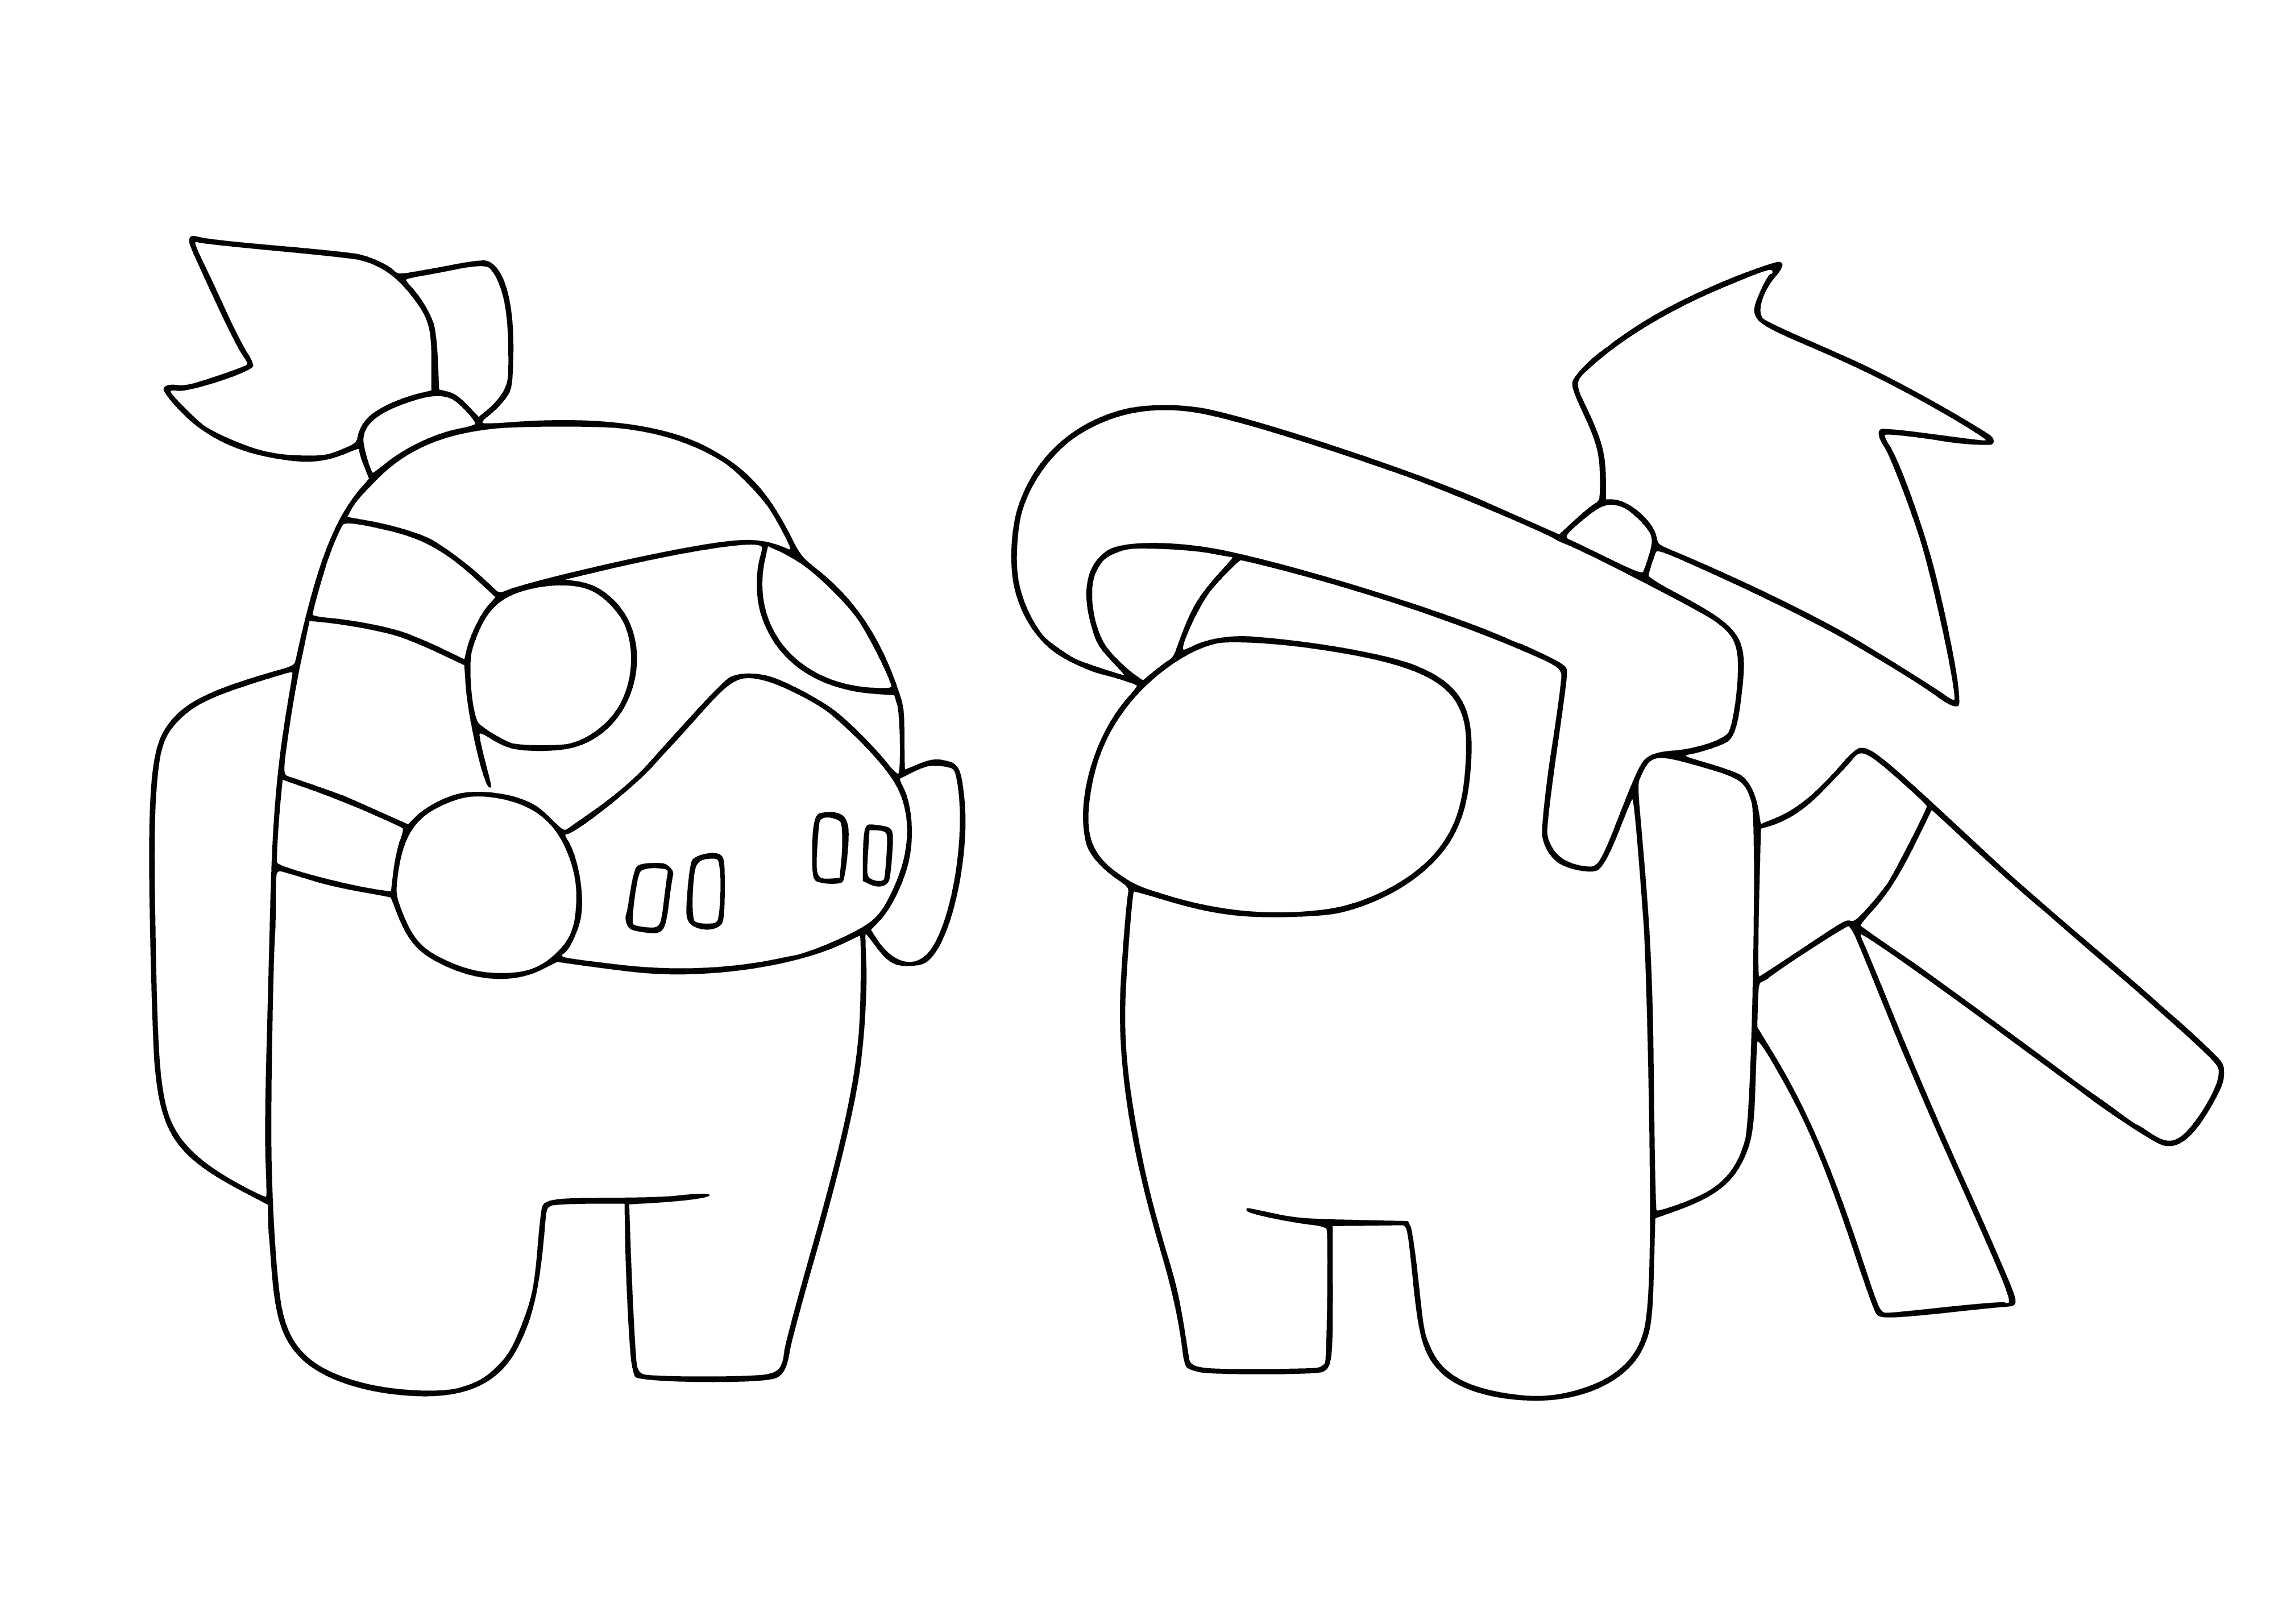 coloring page: Two Among Us characters in spacesuits in a white-walled room - one standing on a stool and one on the floor. Both wearing helmets and gloves.